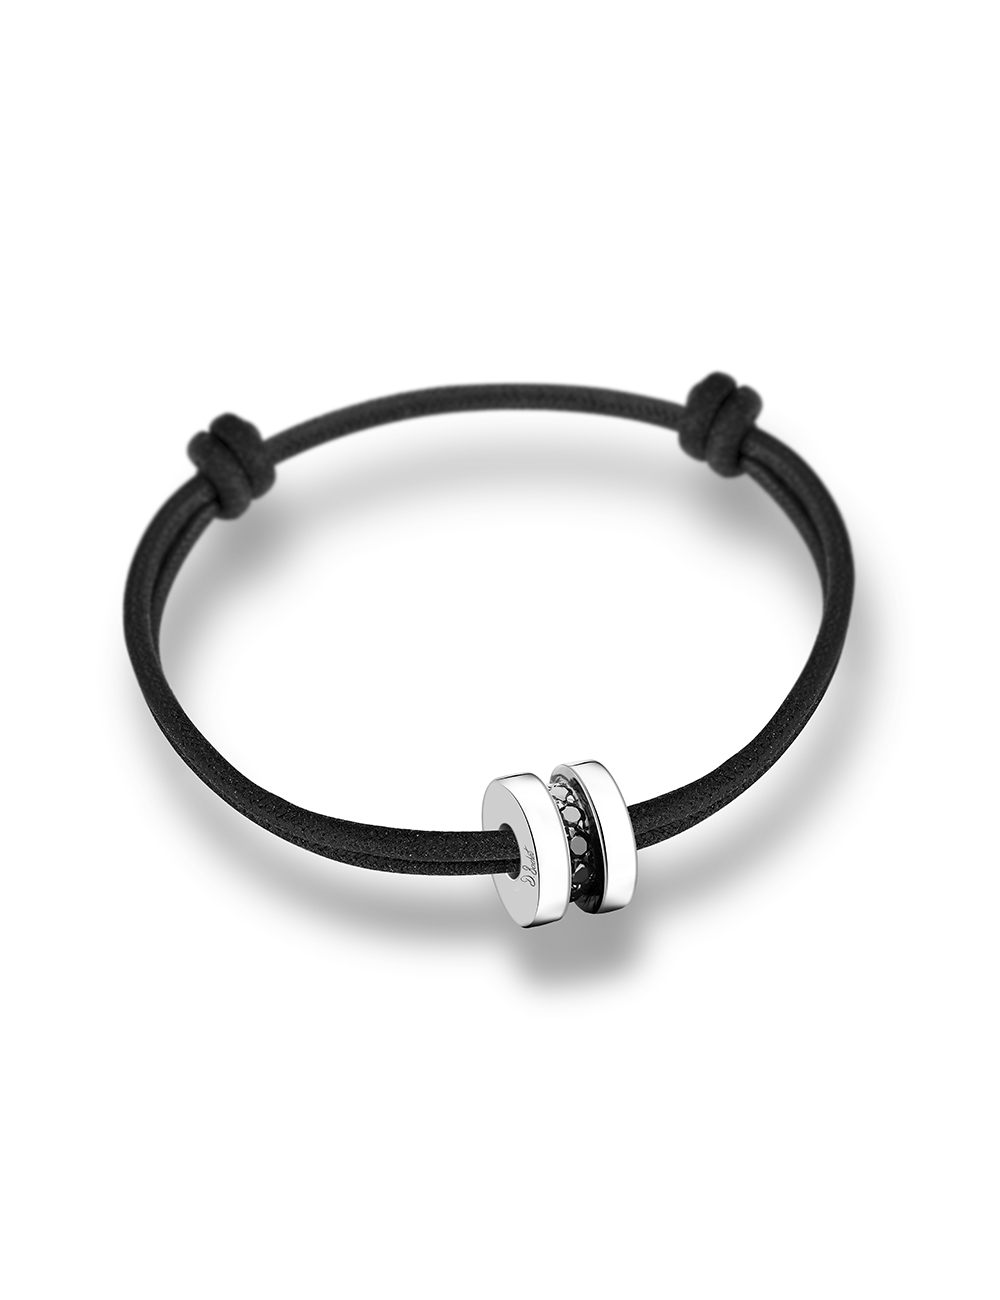 Jewelry gift : men's bracelet on an adjustable black cord, in white gold 18k and black diamonds